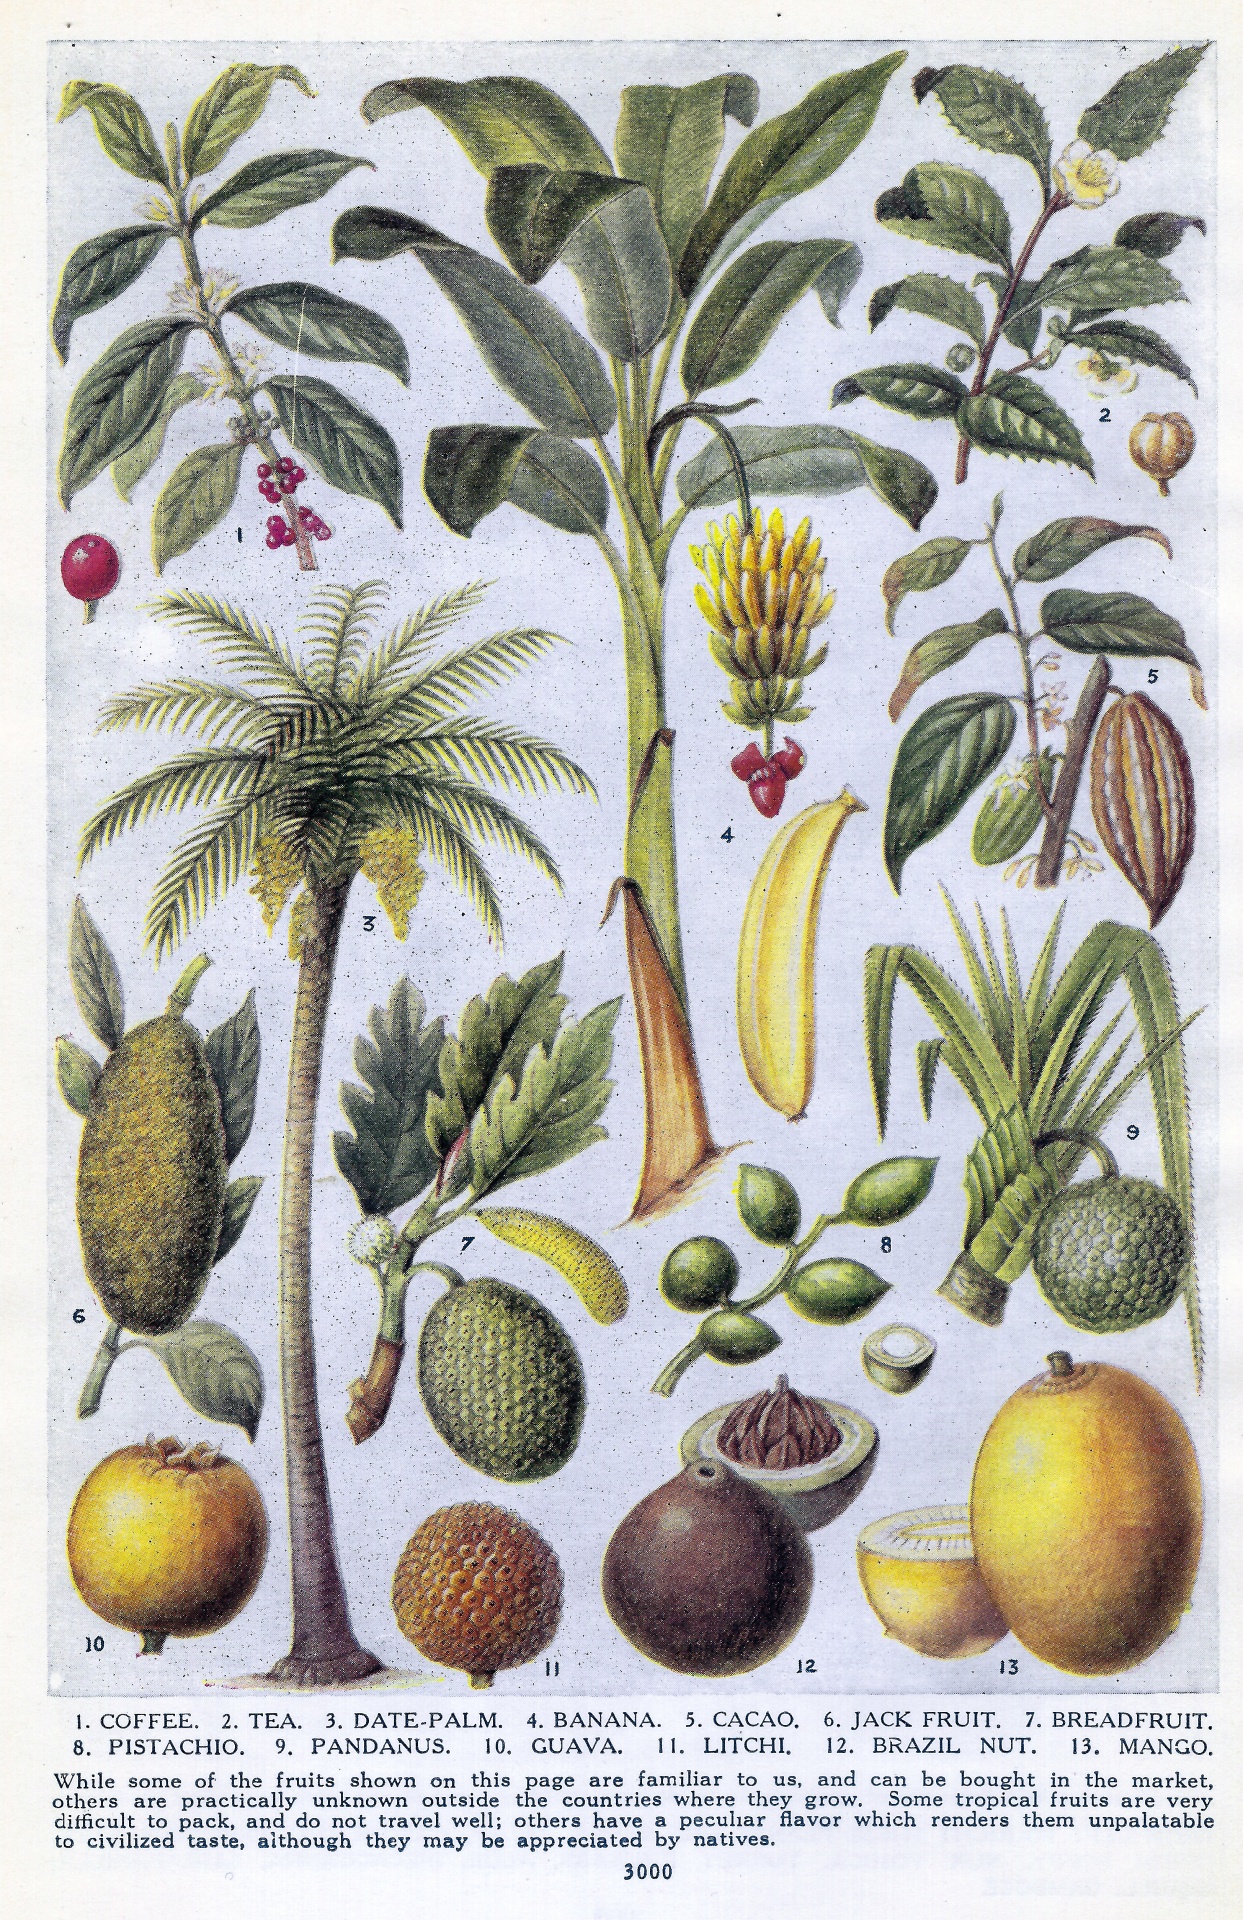 Vintage illustration of a variety of tropical crops grown in the early 20th century